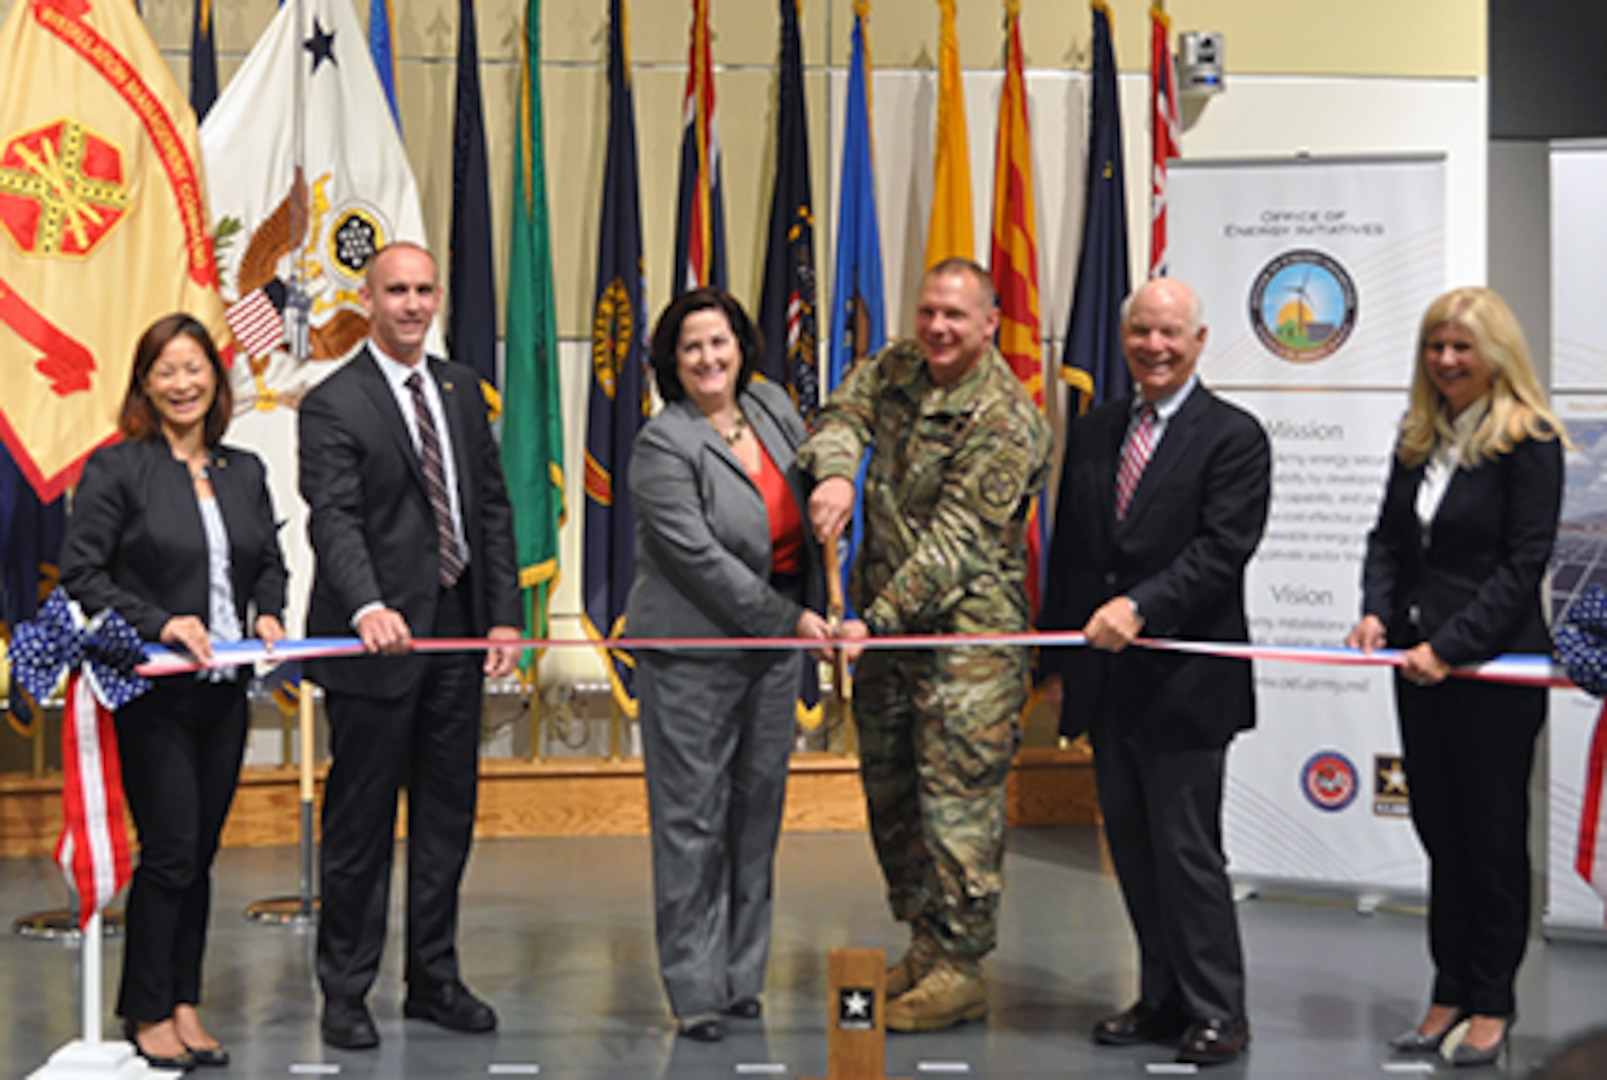 Defense Logistics Agency Energy Deputy Commander George Atwood [second to left] and other stakeholders participate in a ribbon-cutting ceremony with other senior officials for the large-scale renewable energy solar project at Fort Detrick, Maryland, June 17.